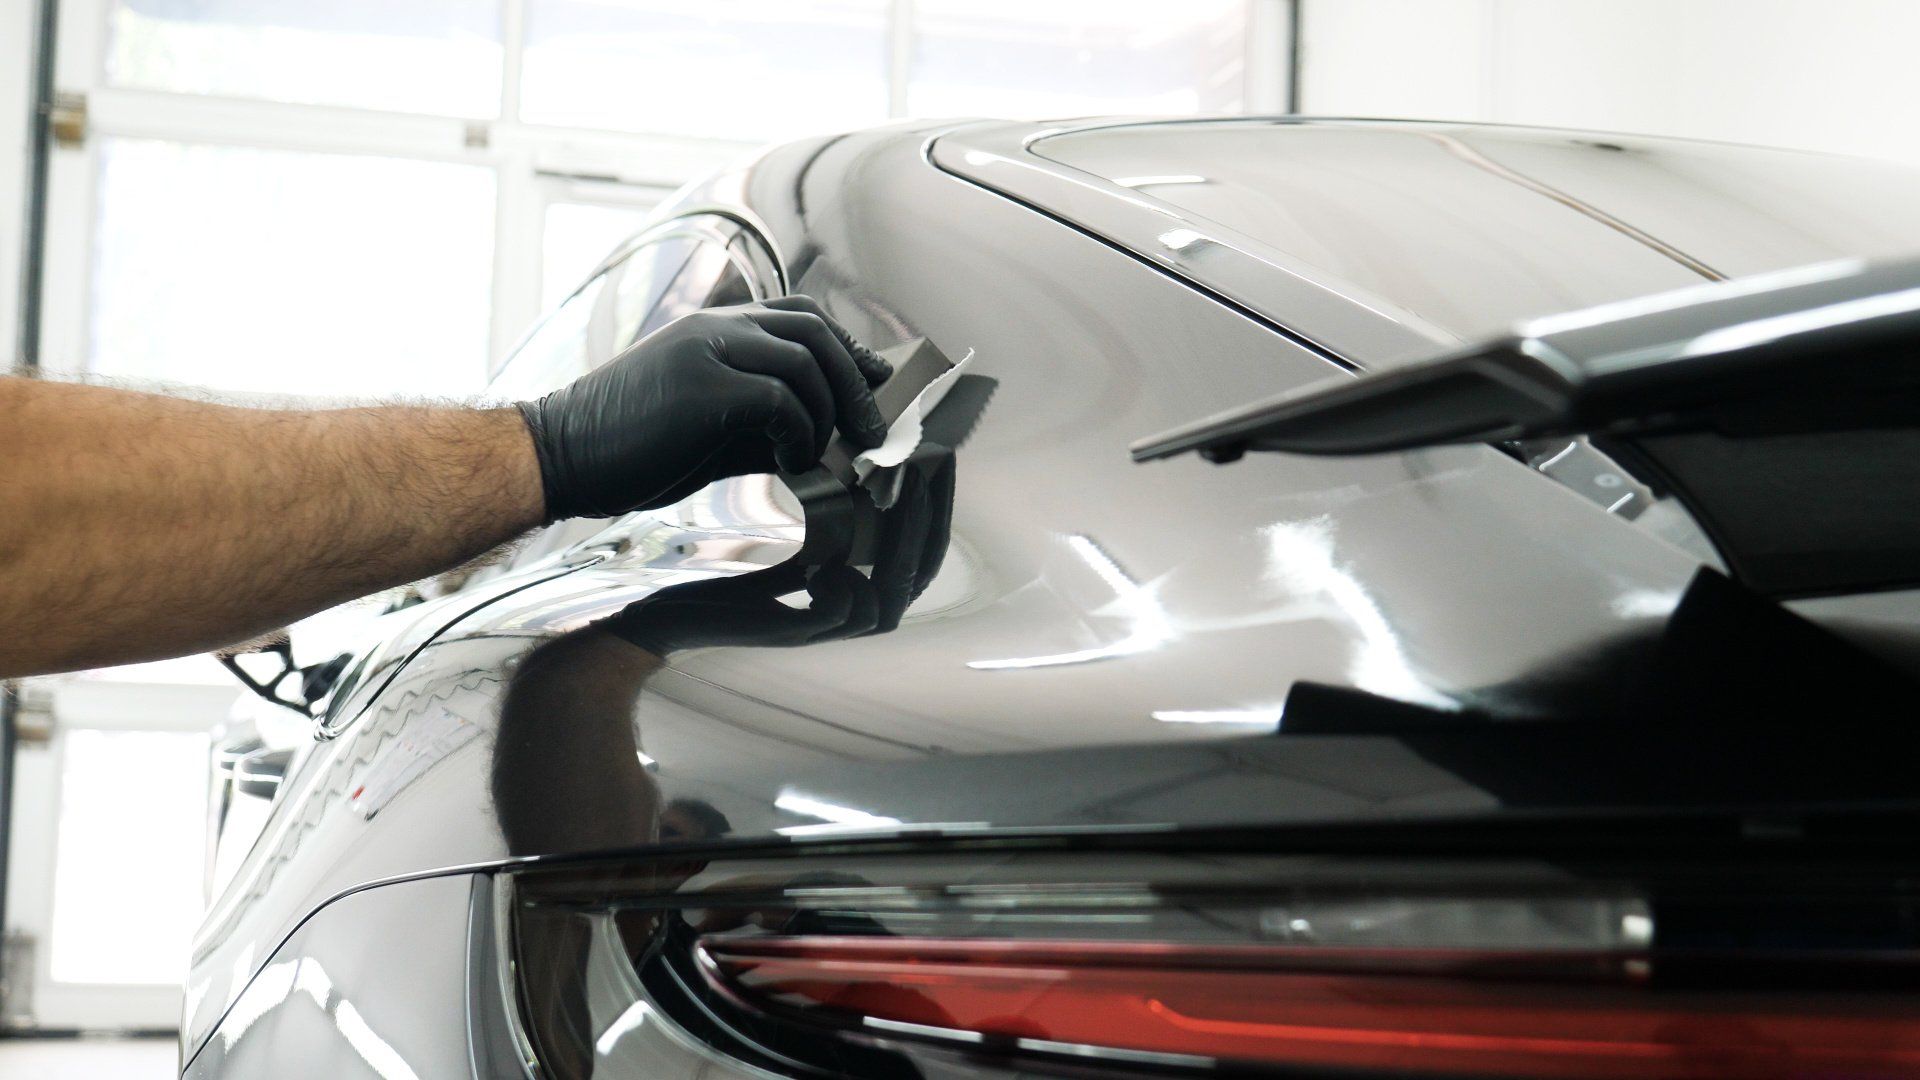 The Complete Guide To Choosing A Ceramic Coating For Your Car